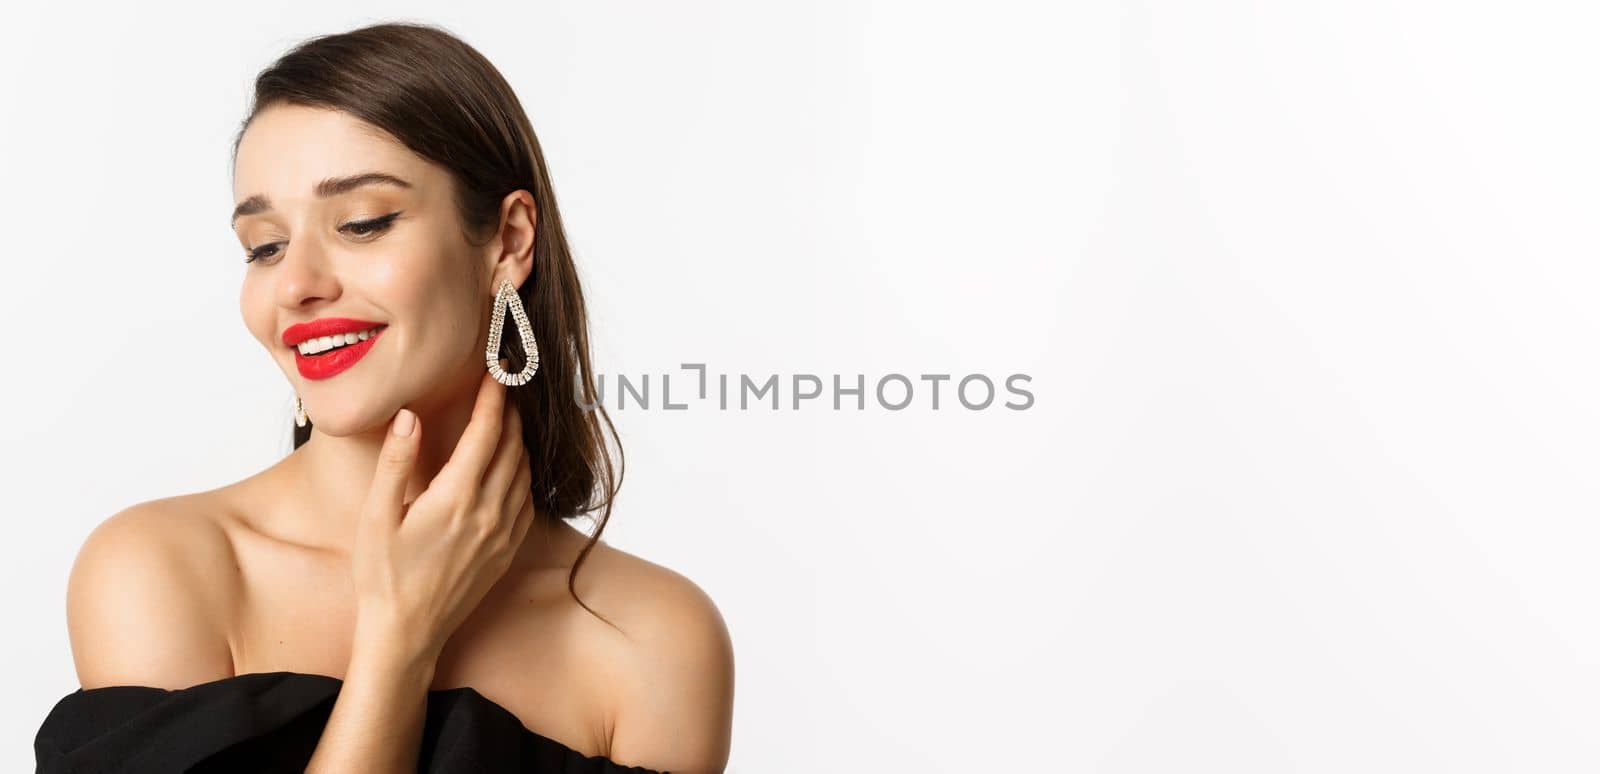 Fashion and beauty concept. Close-up of tender woman in black dress and earrings, gently touching face and smiling, looking down coquettish, standing over white background.